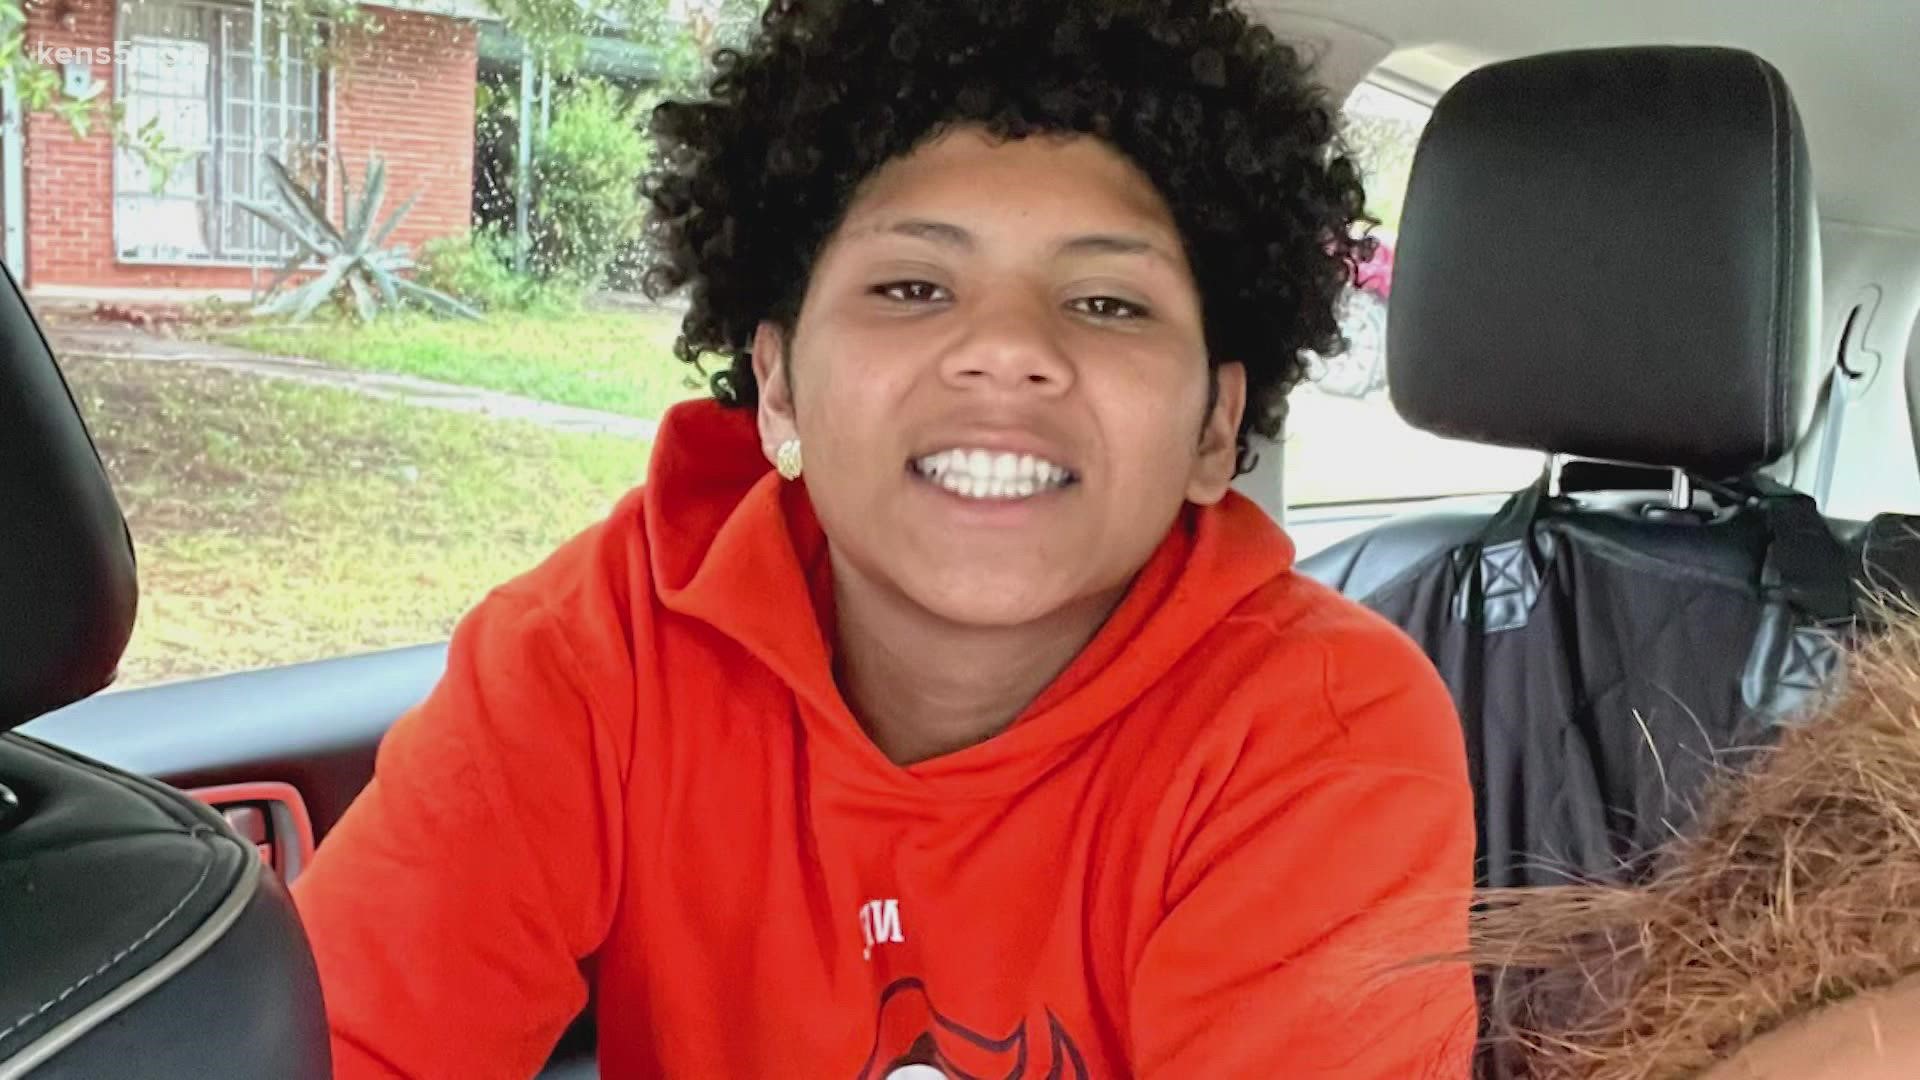 The 16-year-old was shot and killed last Sunday. The suspect has not been arrested and the family wants justice for the teen.